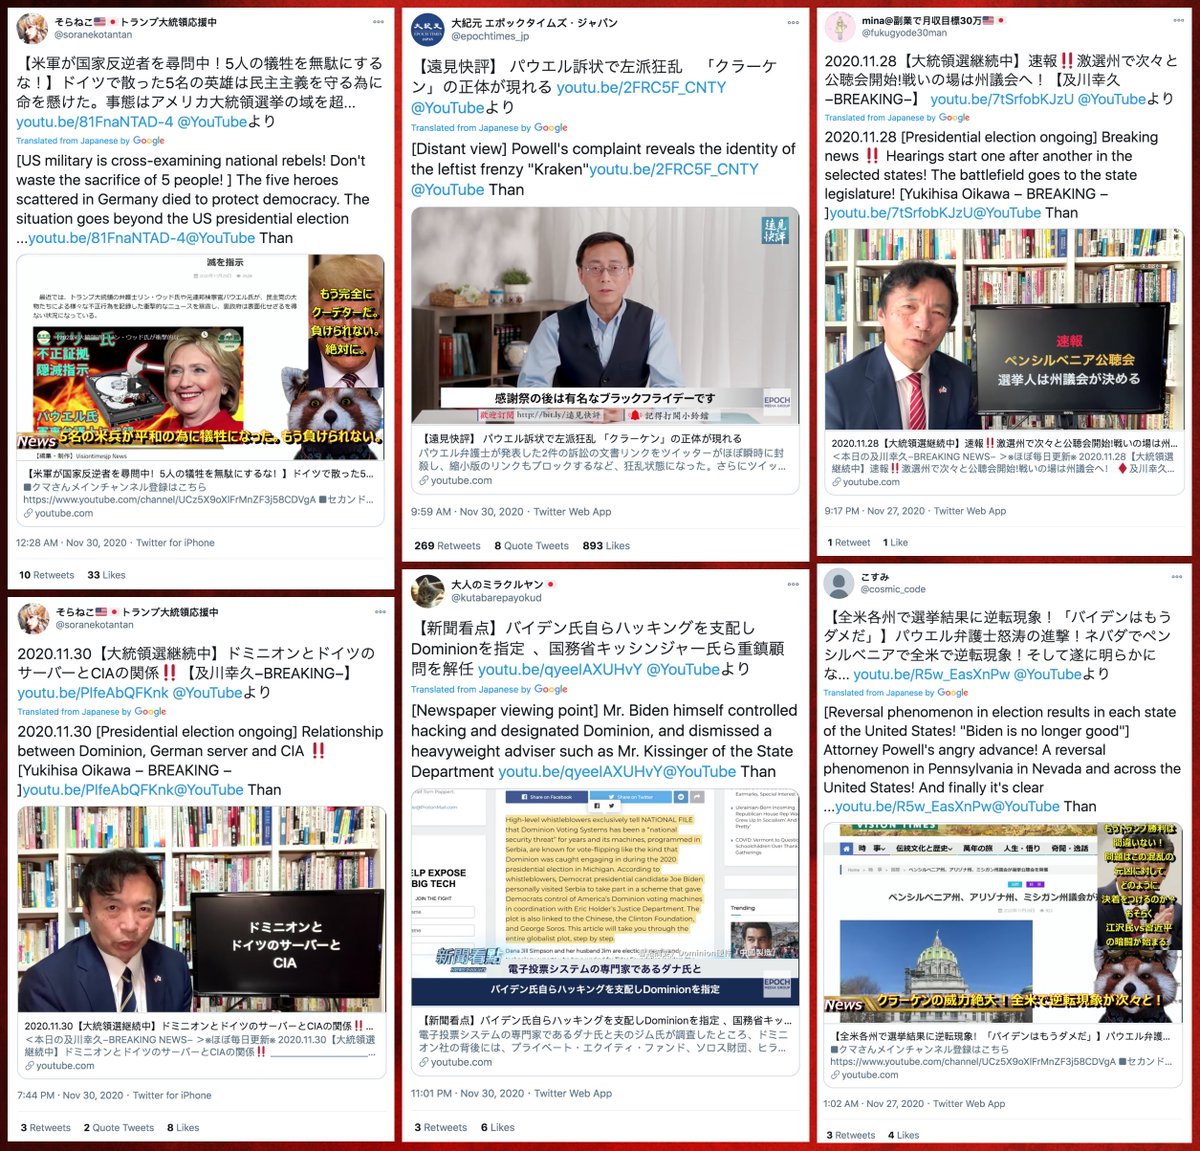 We downloaded the most recent 200 tweets from each of  @SidneyPowell1 and  @LLinWood's followers with Japanese display names/bios. The website they most frequently link is YouTube, with a focus on conspiracy theory videos related to the 2020 US presidential election.